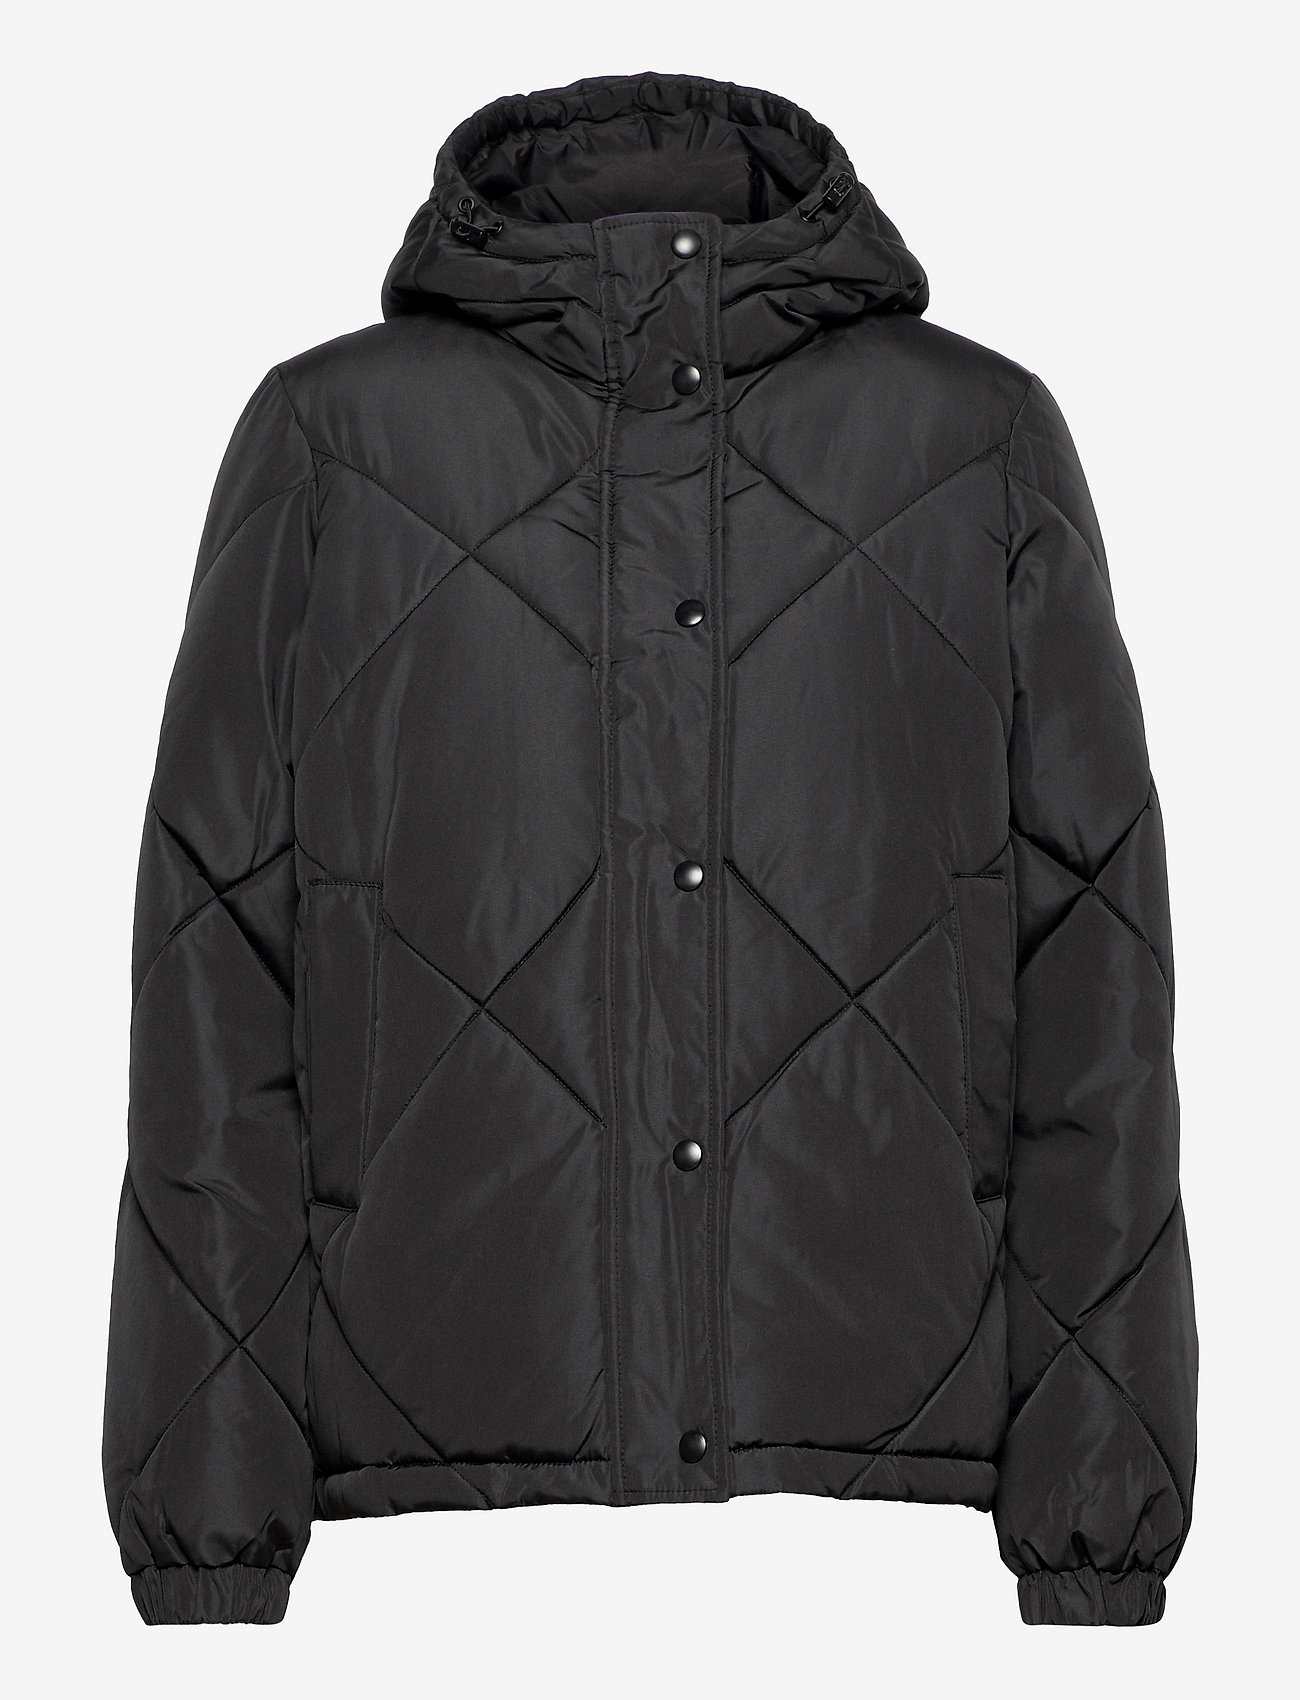 Selected Femme - SLFMONIKA PUFFER JACKET - quilted jackets - black - 0